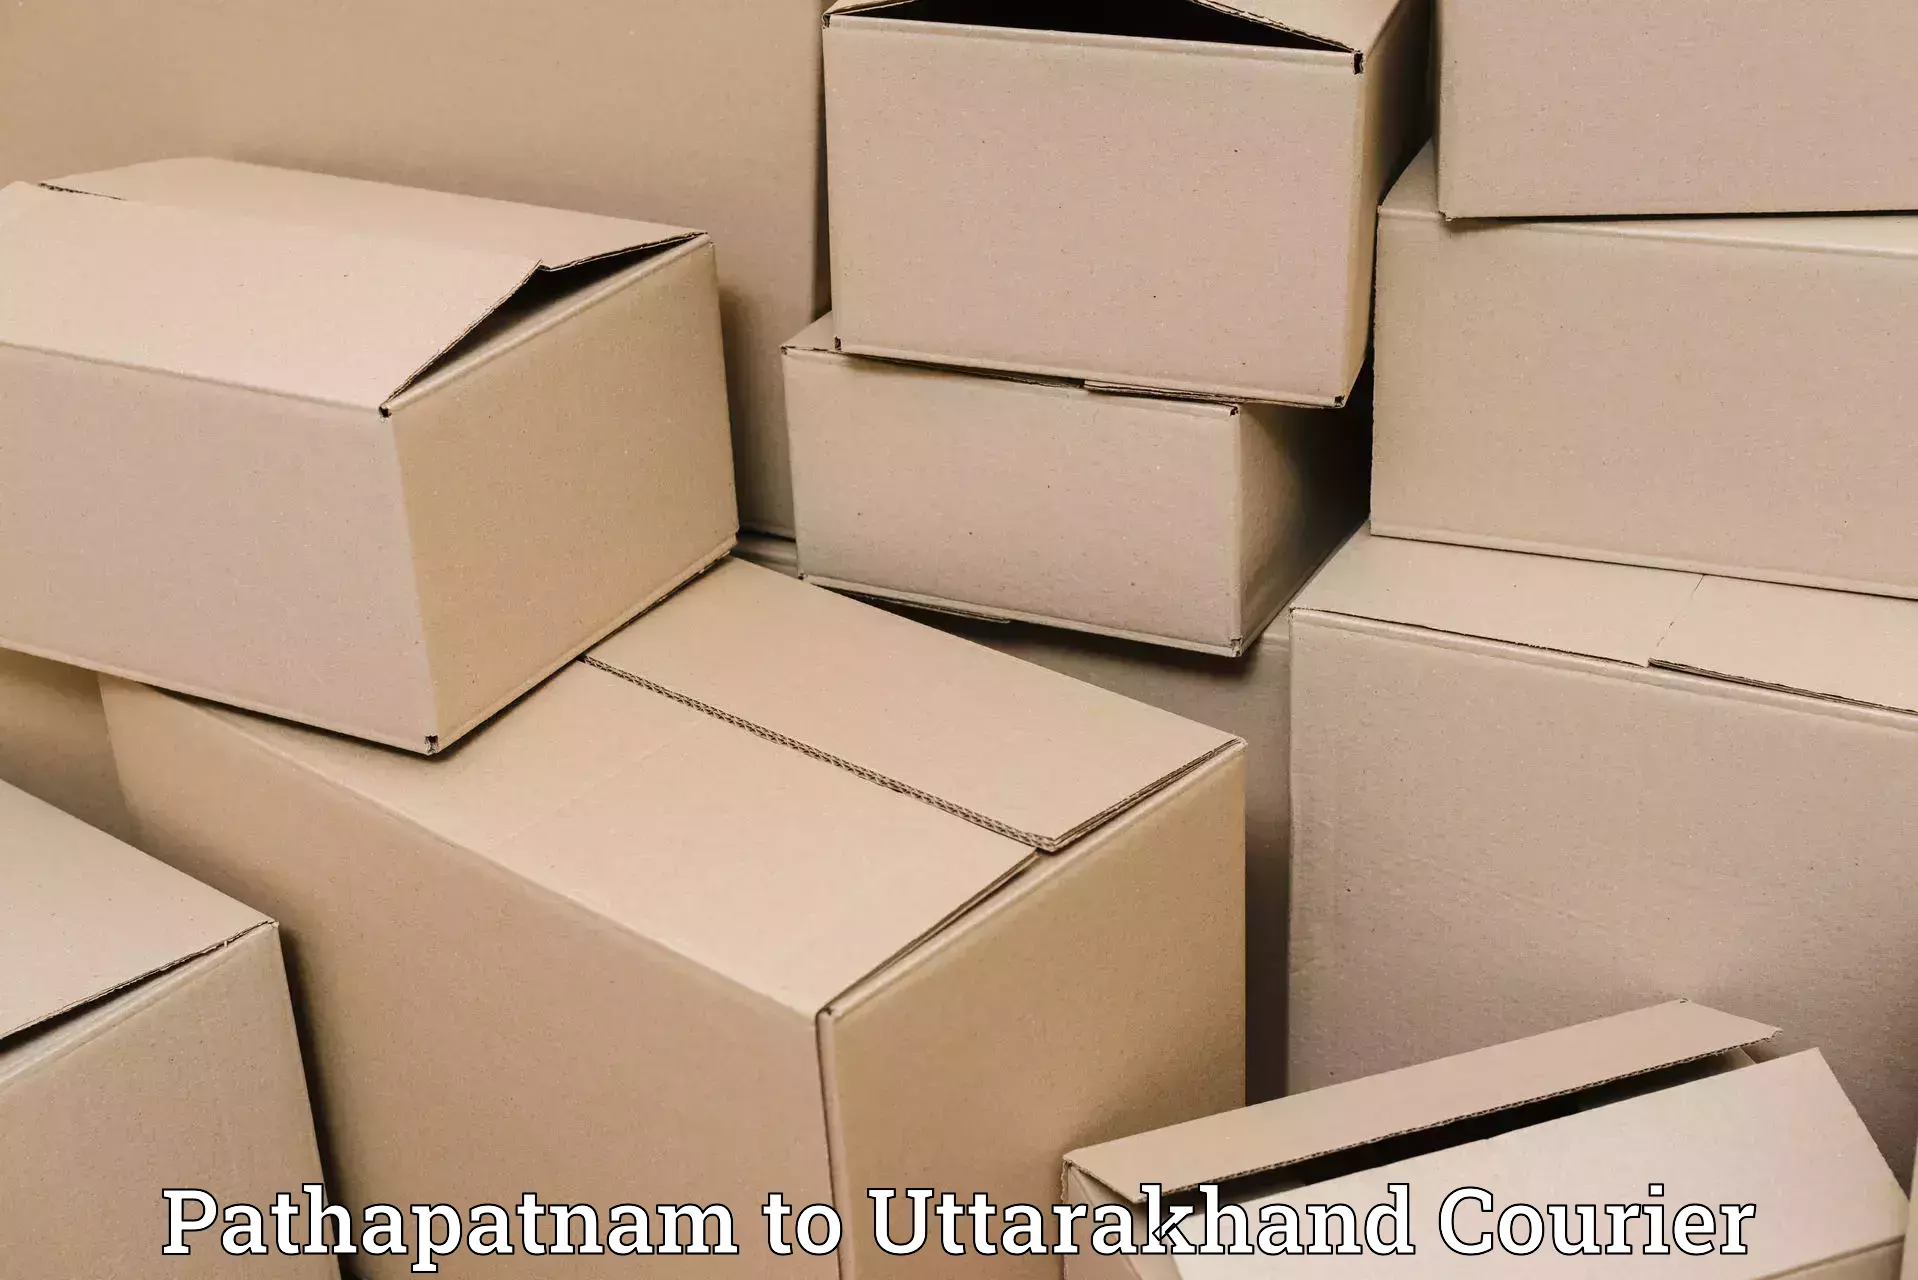 Business delivery service Pathapatnam to Uttarakhand